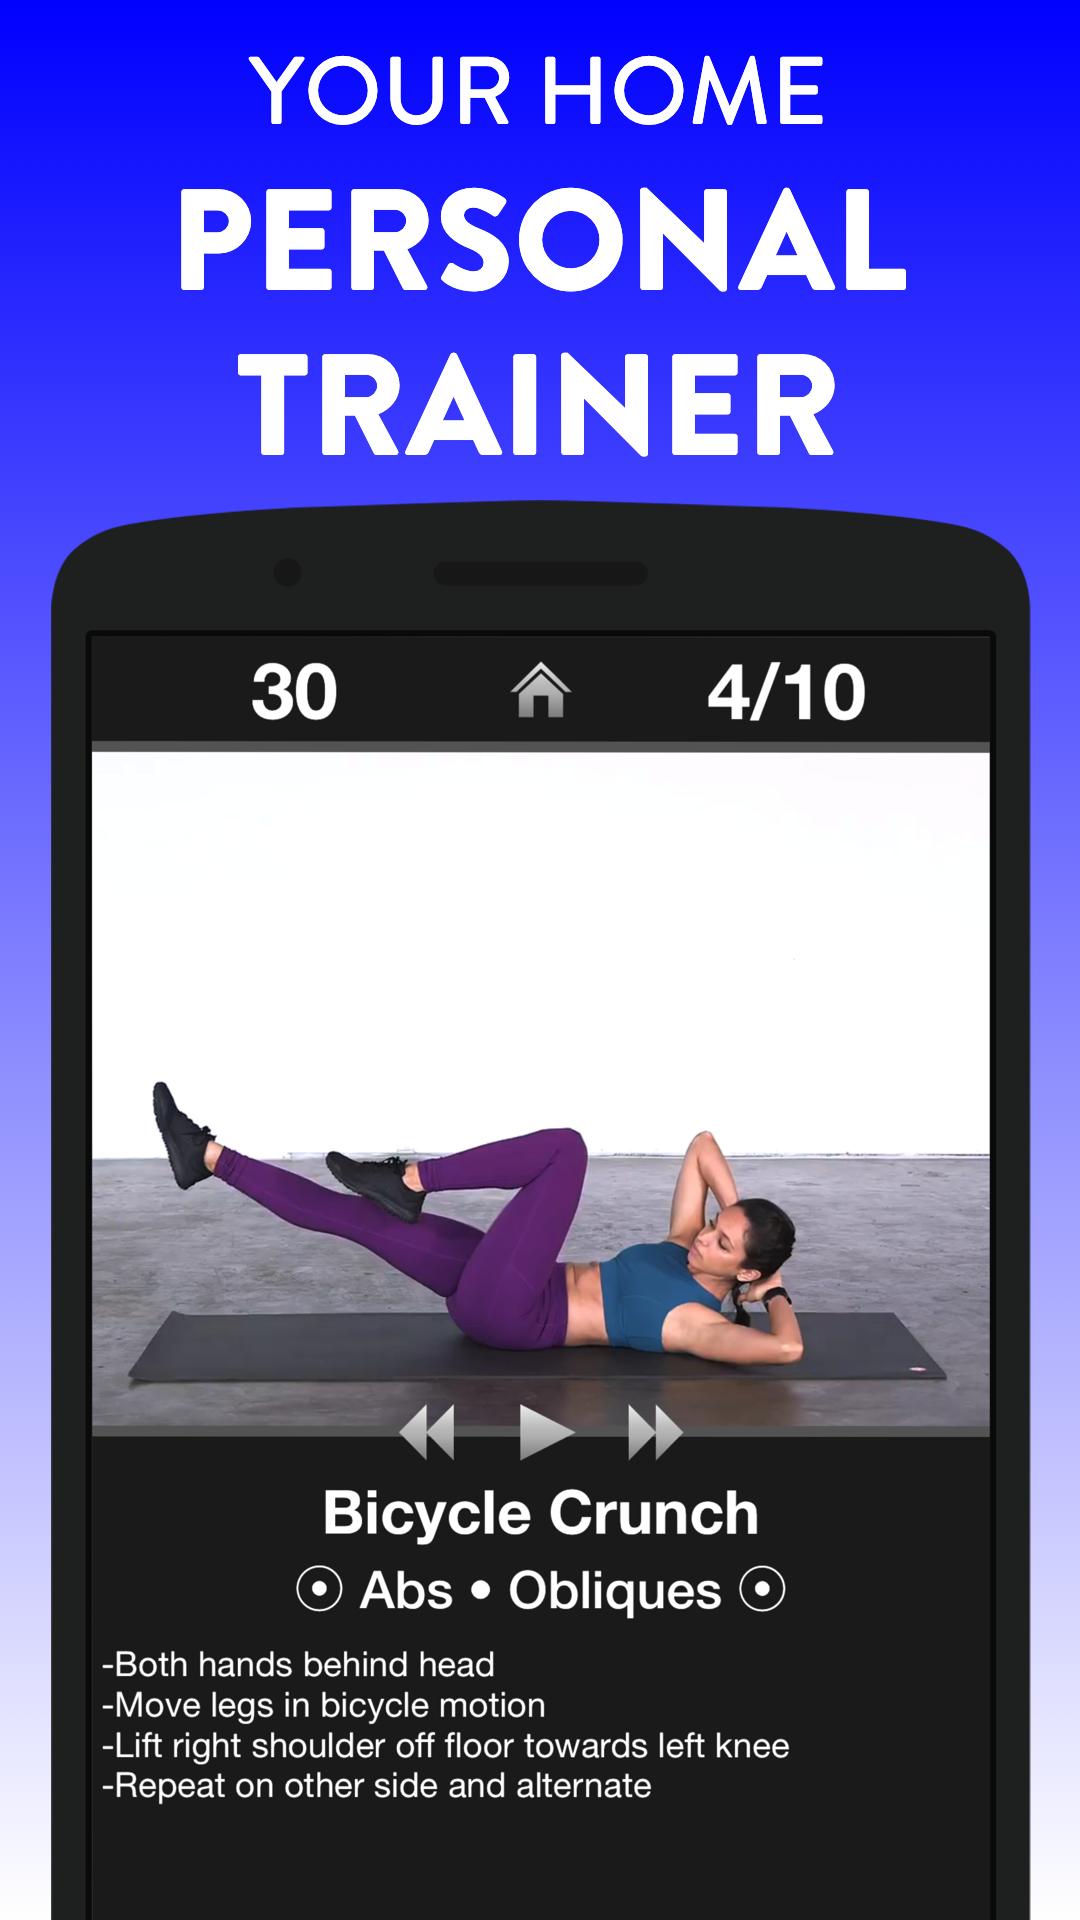 Daily Workouts - Exercise Fitness Workout Trainer 6.12 Screenshot 1